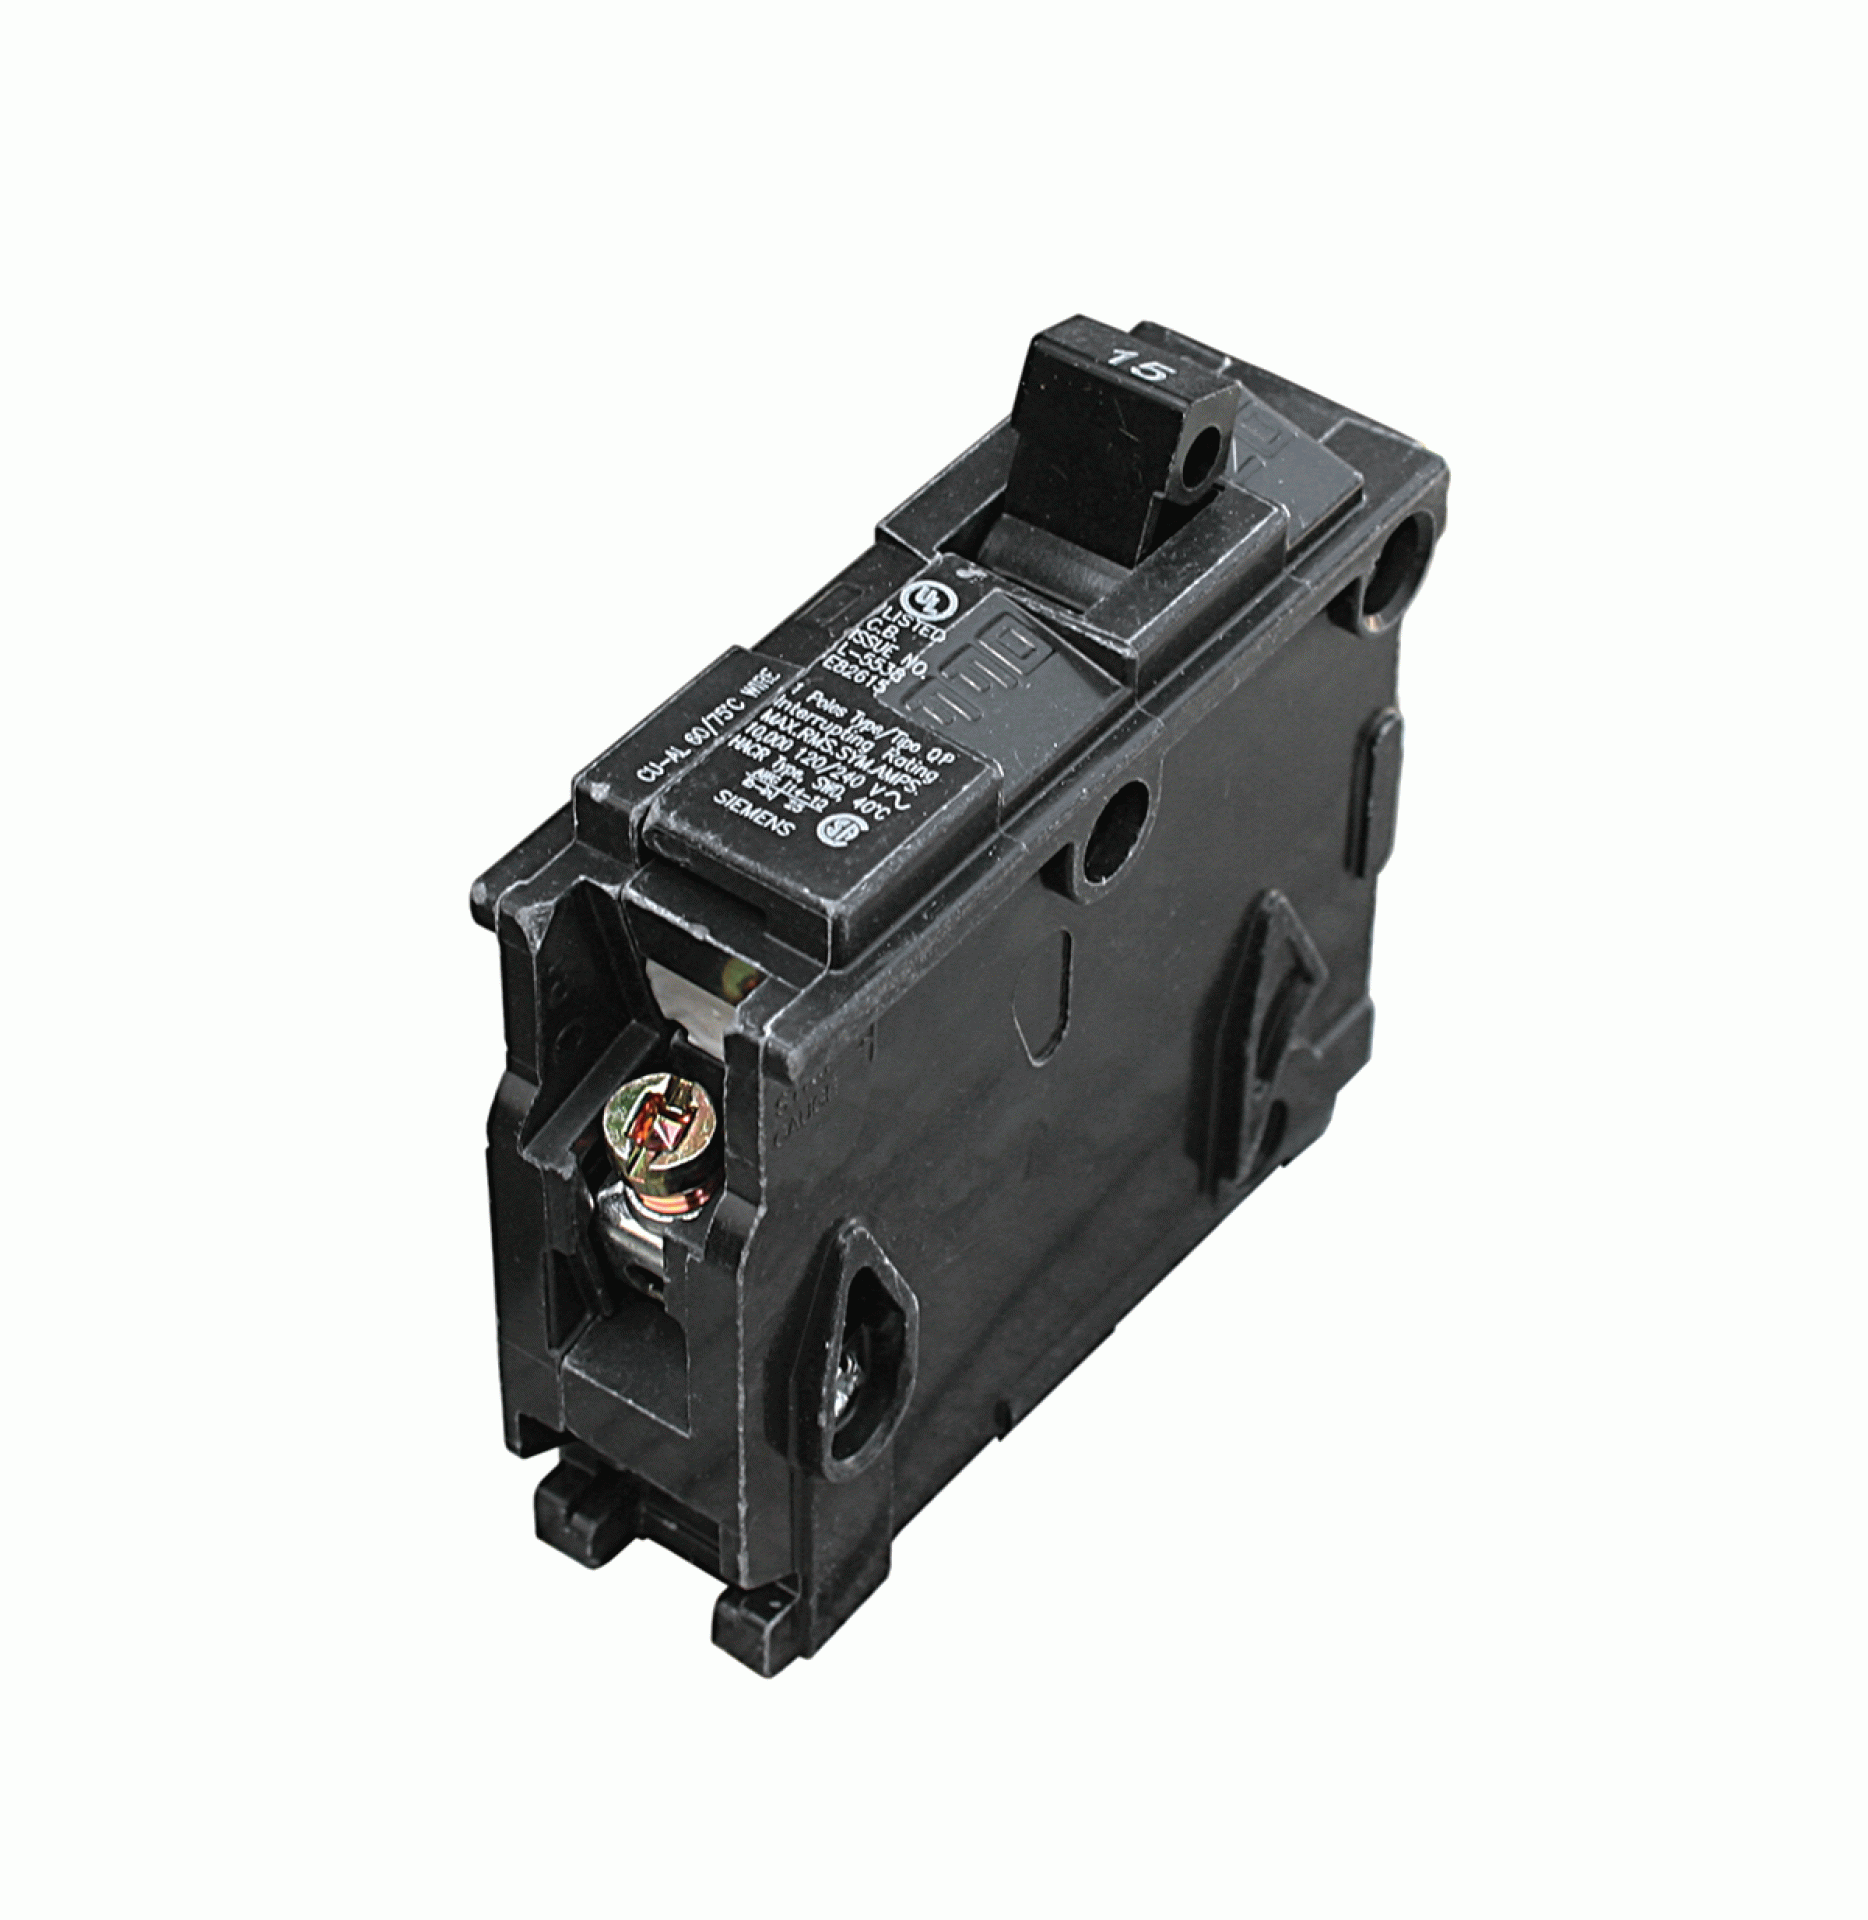 PARALLAX POWER SUPPLY | ITEQ115 | CIRCUIT BREAKER - ONE POLE - 15 AMP